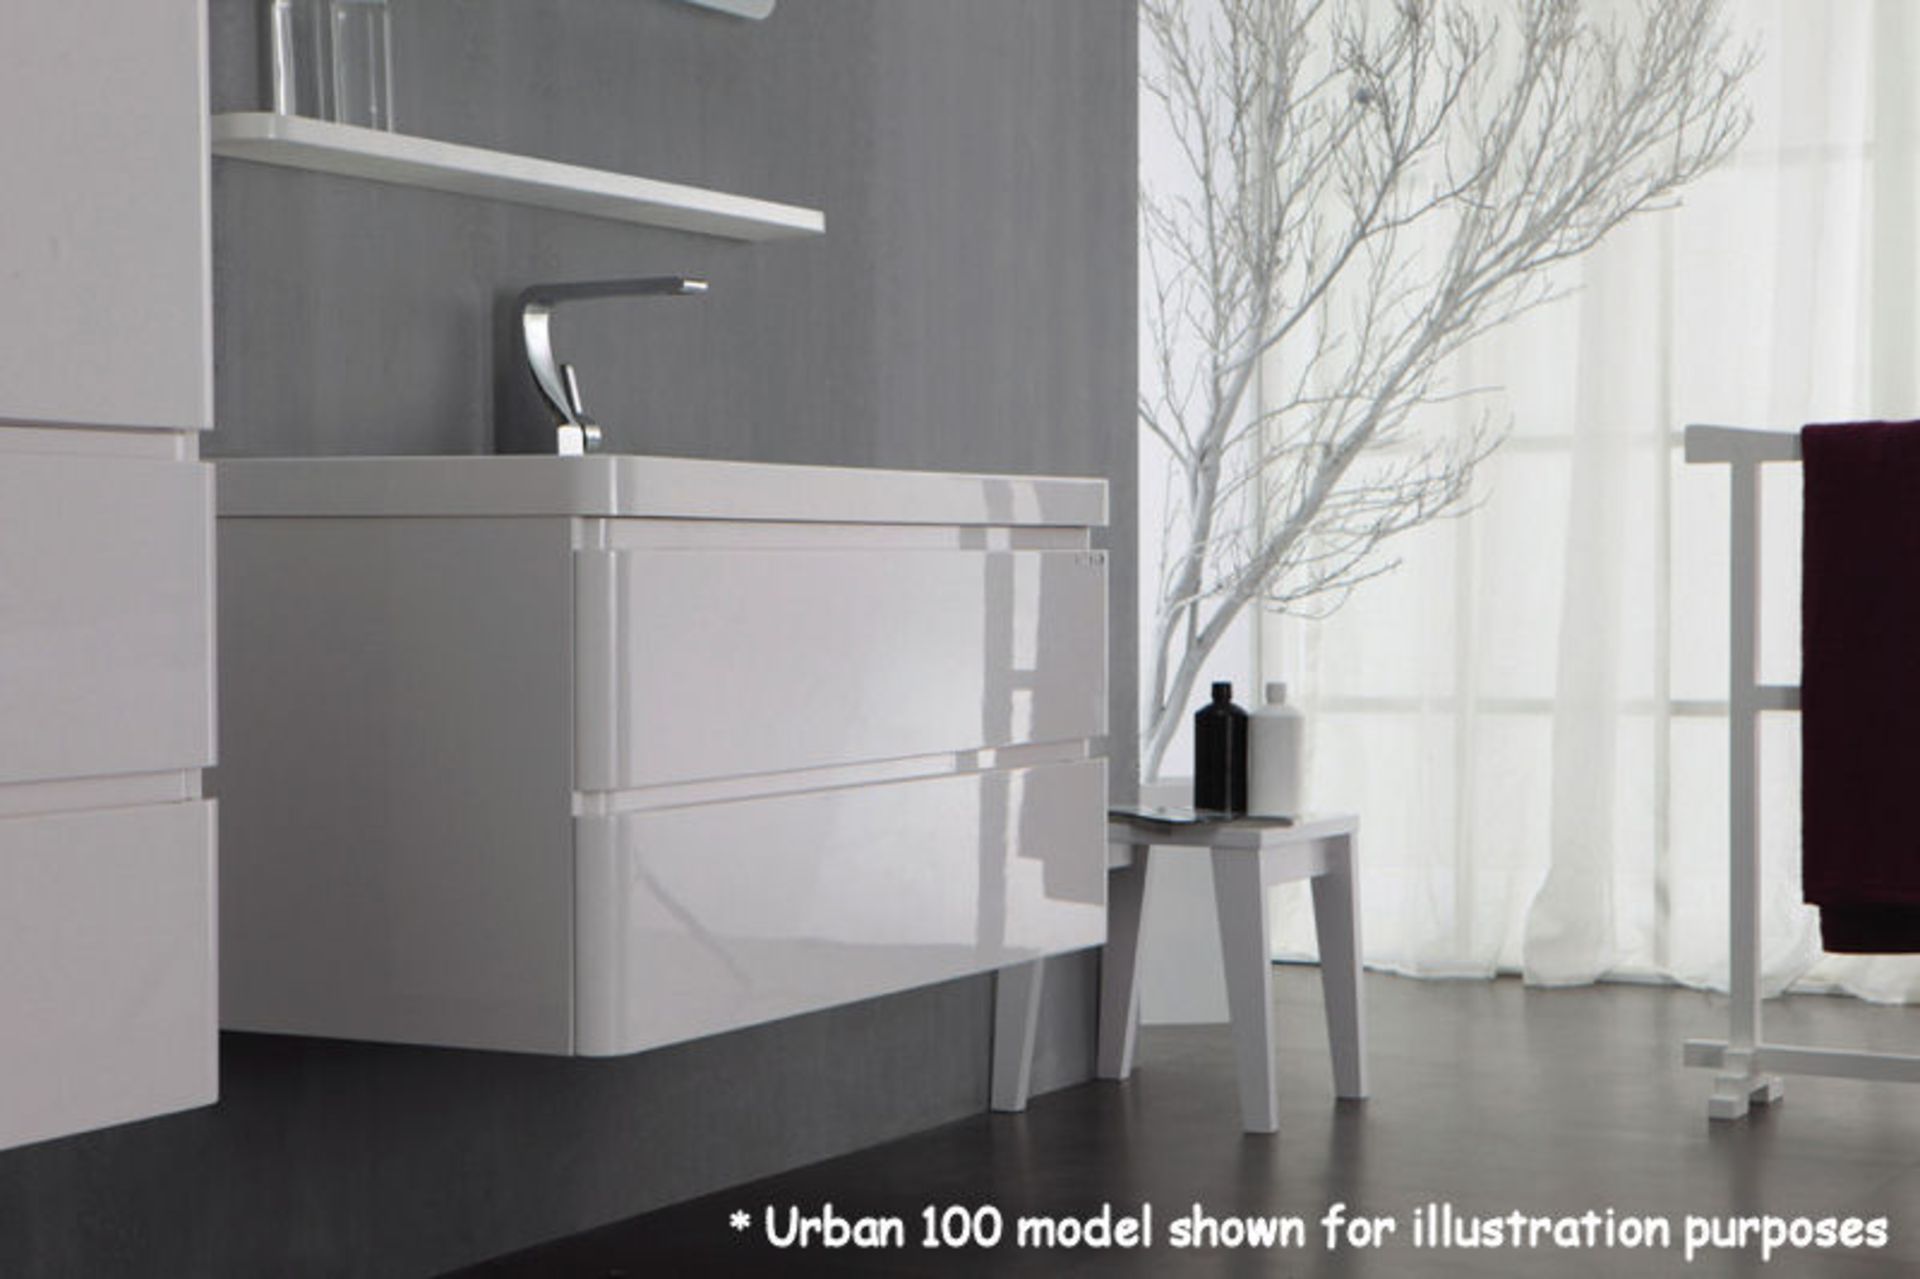 1 x MarbleTECH Urban Basin and Base Unit 60 - A-Grade - Ref:ABS21-060 & AWS31-060 - CL170 - Location